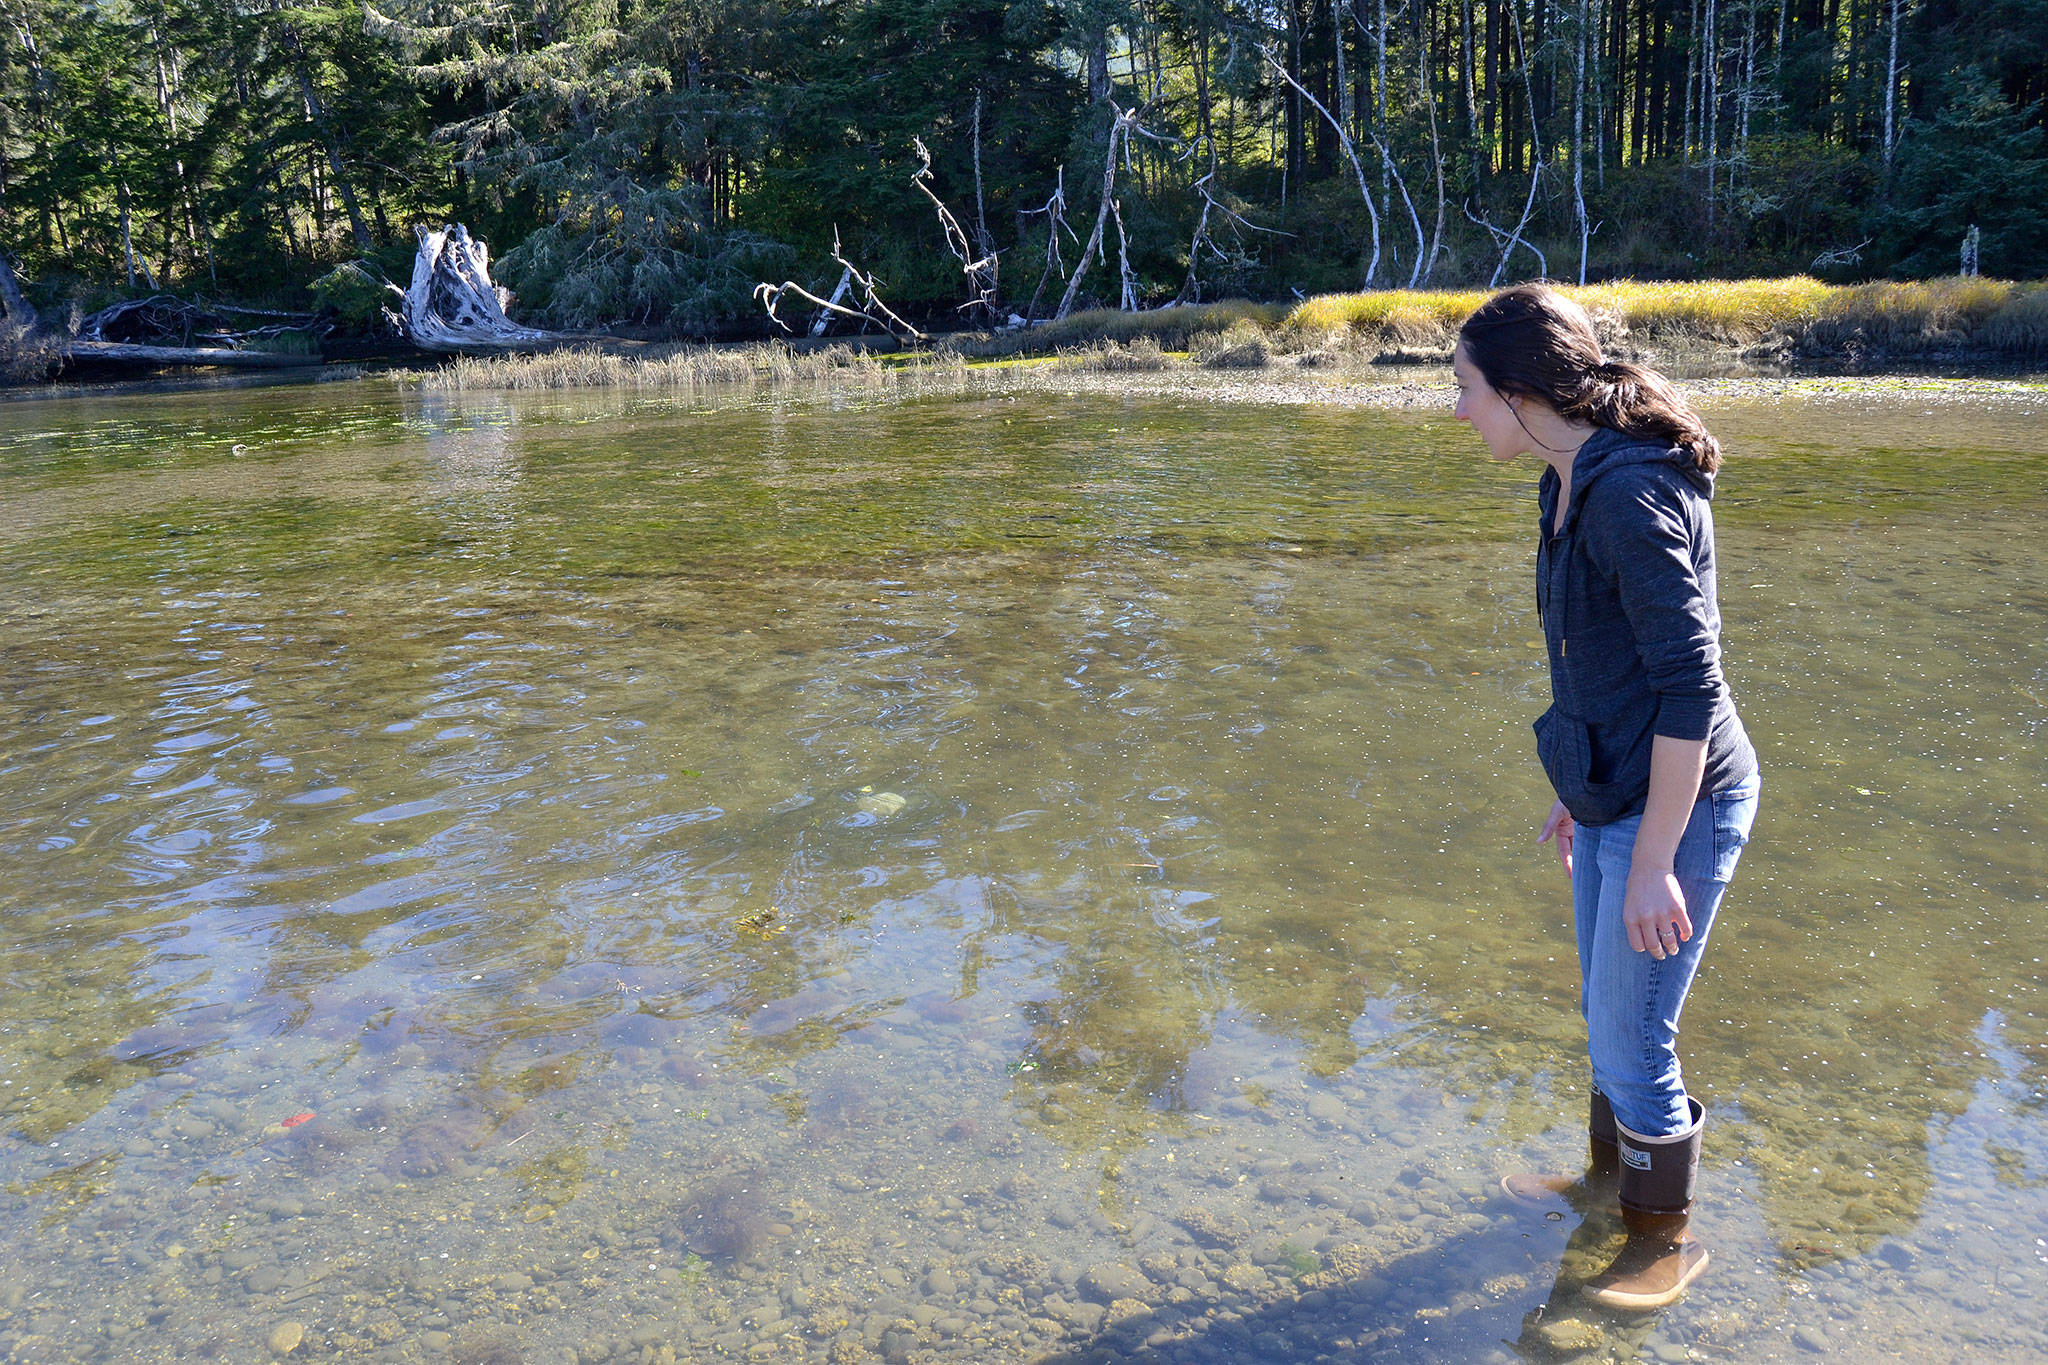 Adrianne Akmajian, marine ecologist with Makah Fisheries Management, inspects a trap in a canal off the Tsoo-Yess River on Sept. 26. She said her team recently began trapping by a nearby fallen tree and recovered several European green crab. (Matthew Nash/Olympic Peninsula News Group)